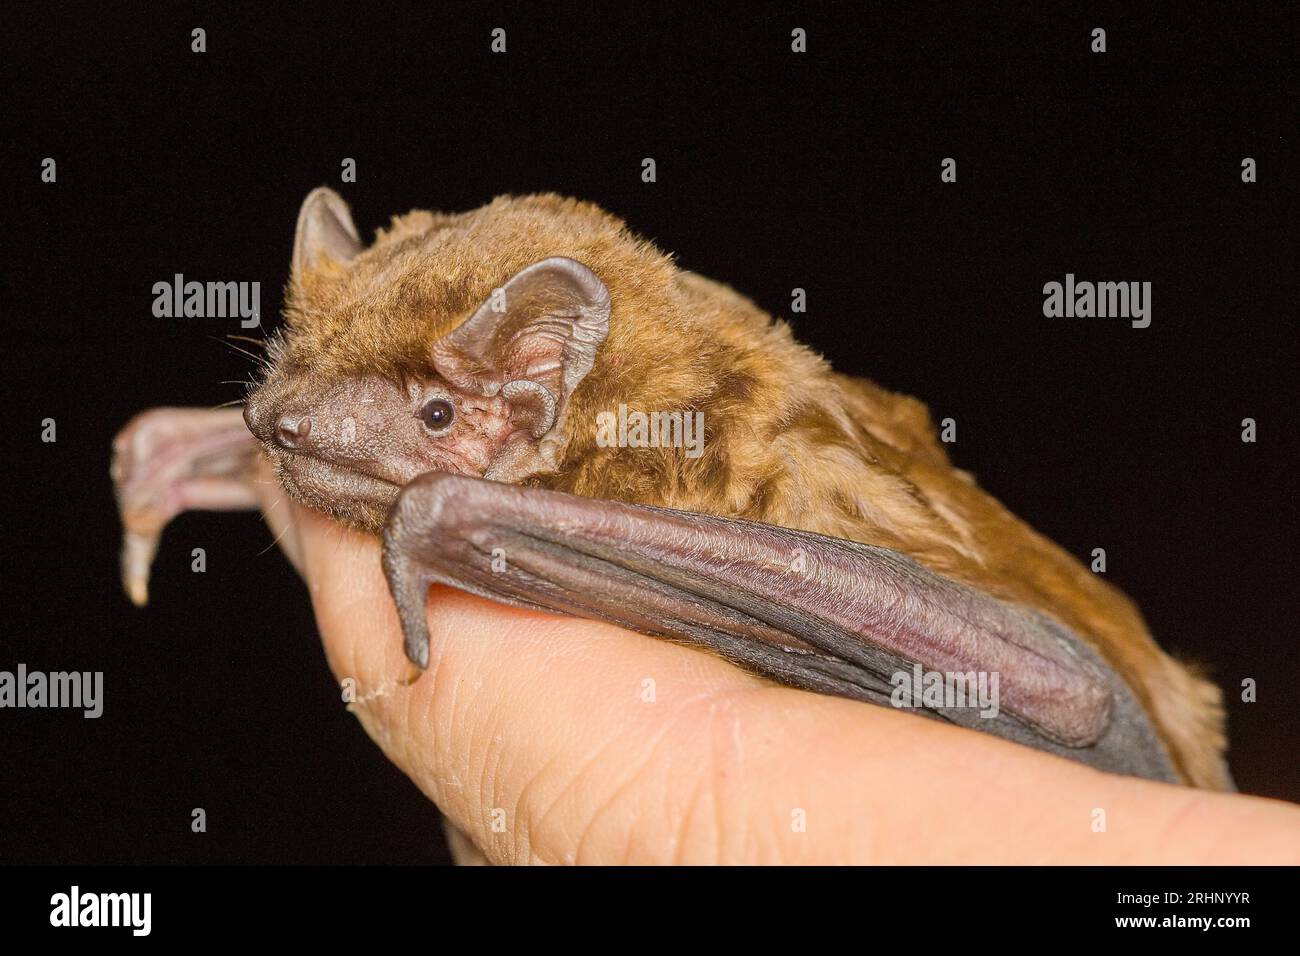 The common noctule bat (Nyctalus noctula) head detail on the hand of man Stock Photo